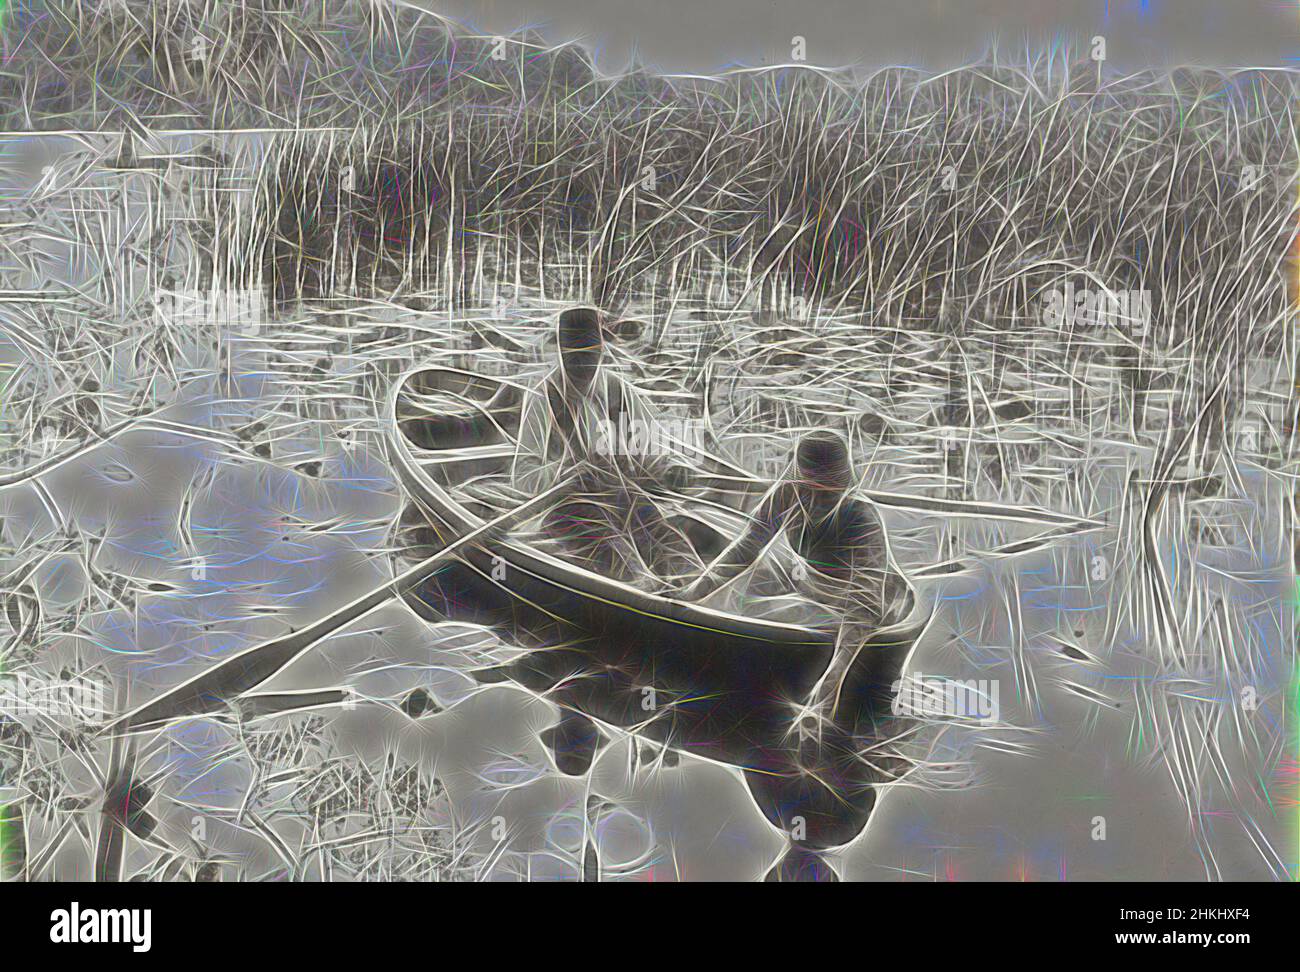 Inspired by Water-lily pickers in a rowboat on the Norfolk Broads, Gathering Water-Lilies, Peter Henry Emerson, publisher: Marston, Searle, & Rivington Sampson Low, Norfolk, publisher: Great Britain, 1885 - 1886, height 198 mm × width 290 mmheight 289 mm × width 413 mm, Reimagined by Artotop. Classic art reinvented with a modern twist. Design of warm cheerful glowing of brightness and light ray radiance. Photography inspired by surrealism and futurism, embracing dynamic energy of modern technology, movement, speed and revolutionize culture Stock Photo